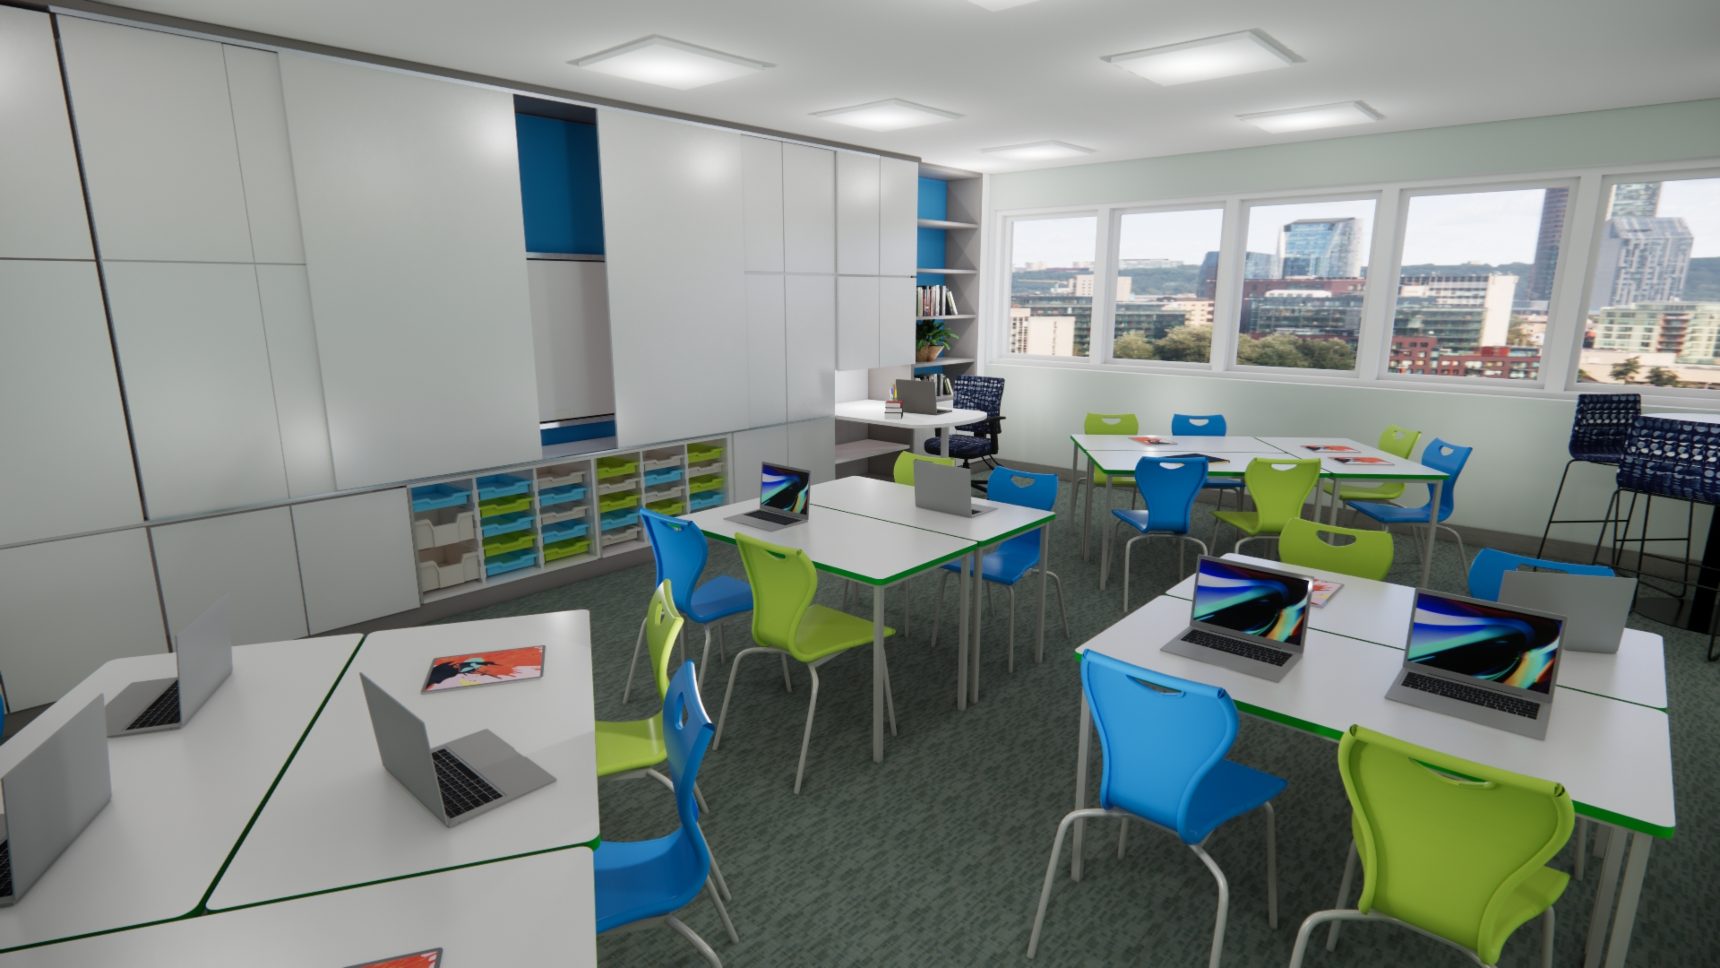 When is the Best Time for School Renovations?